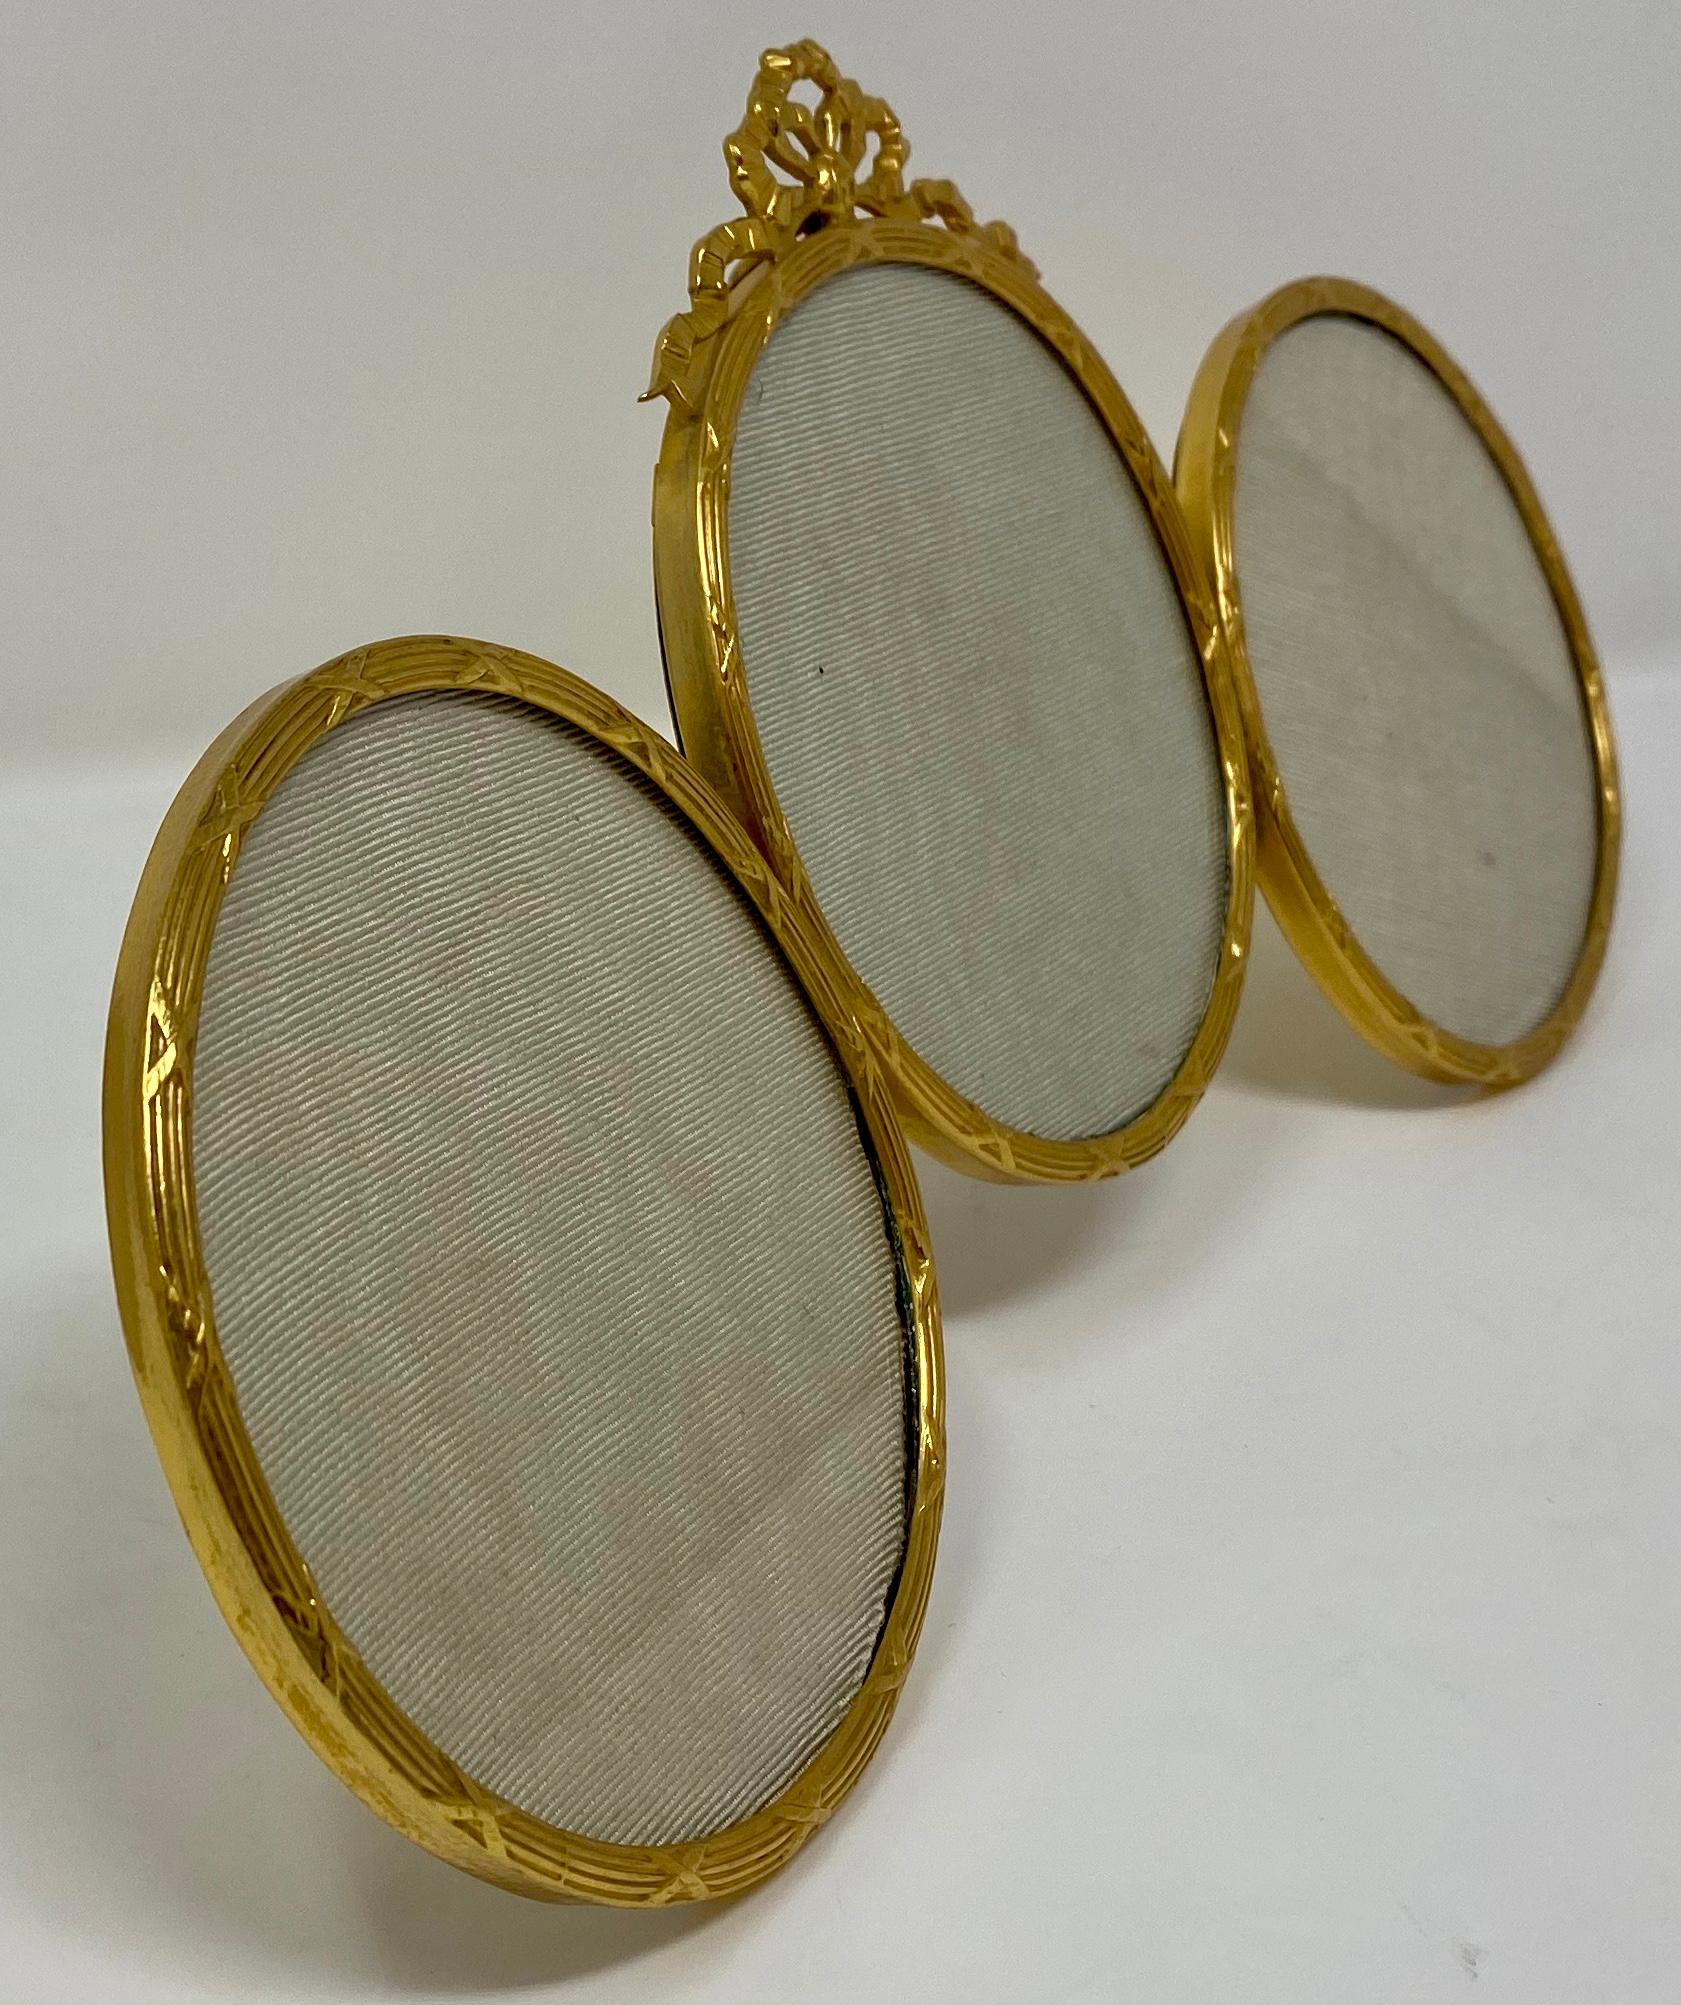 Antique French Louis XVI style handmade bronze dore triptych diameter picture frame.
Measures: 5